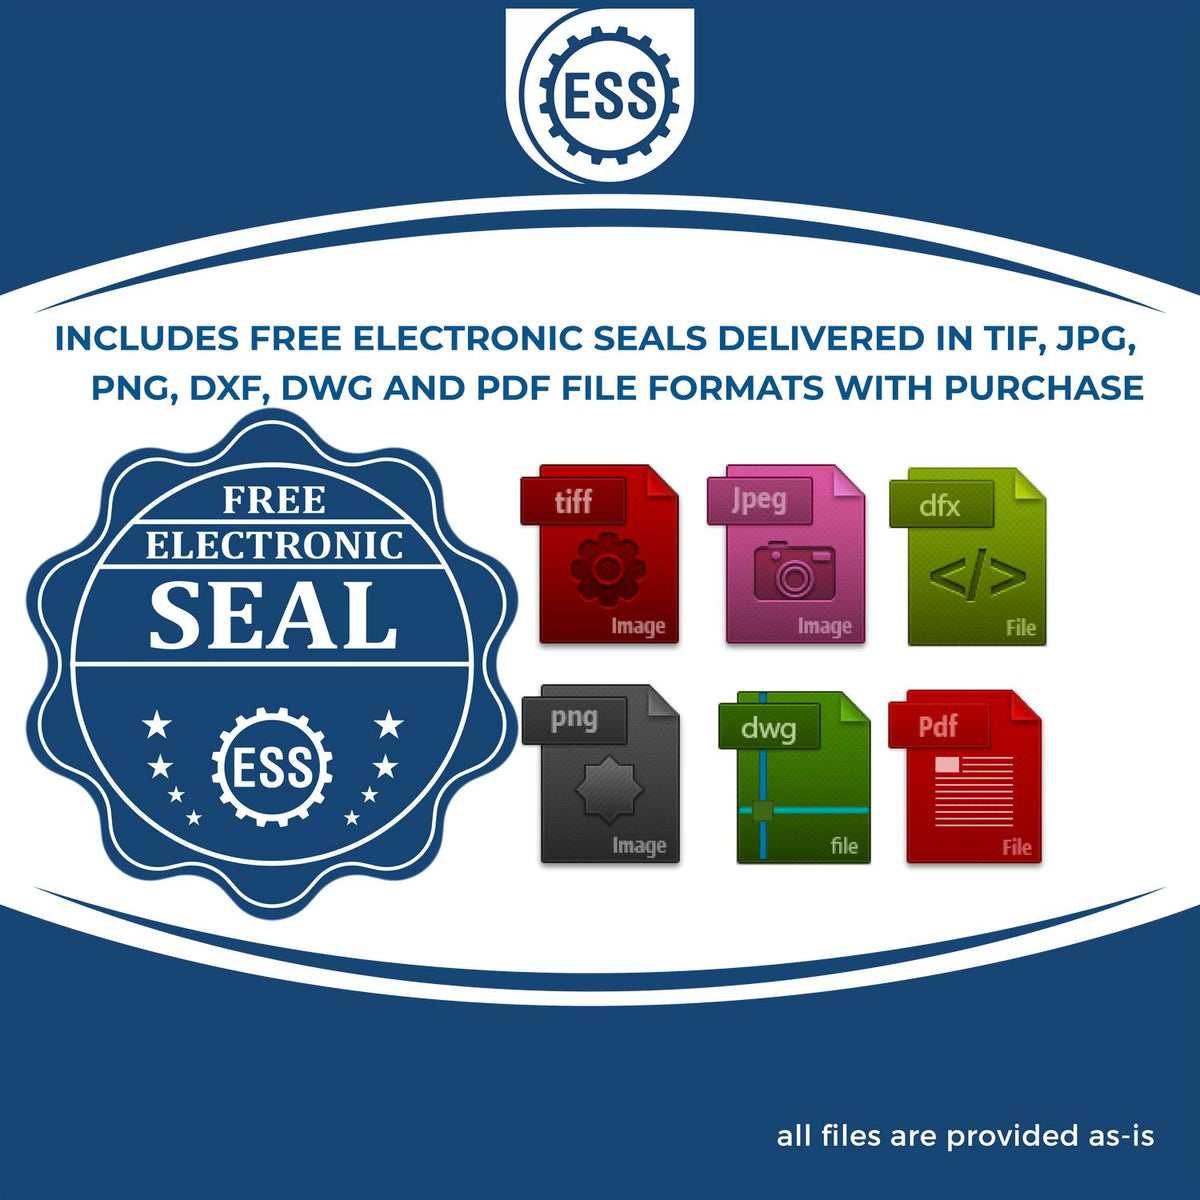 An infographic for the free electronic seal for the Slim Pre-Inked Hawaii Professional Engineer Seal Stamp illustrating the different file type icons such as DXF, DWG, TIF, JPG and PNG.